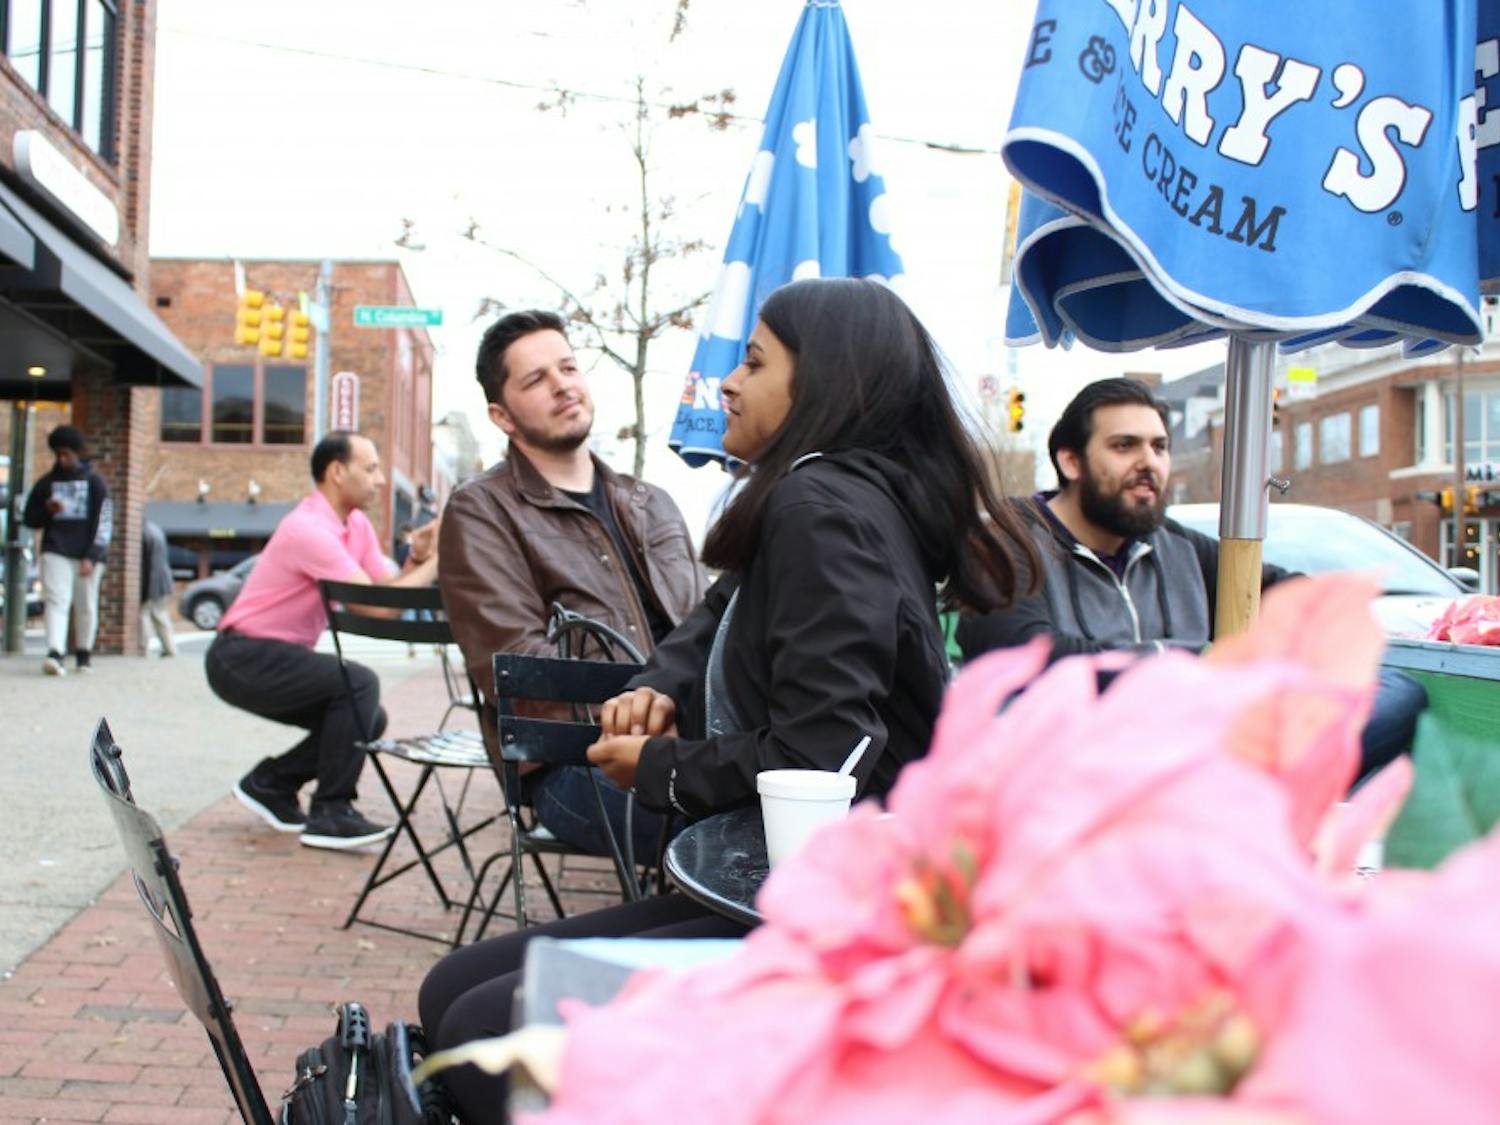 The Chapel Hill Town Planning Commission is considering changing the sidewalk dining ordinance to expand seating. Adam James, David Alki, and Aditi Patel sit outside of Ben and Jerry's on Franklin Street Thursday, March 21, 2019.